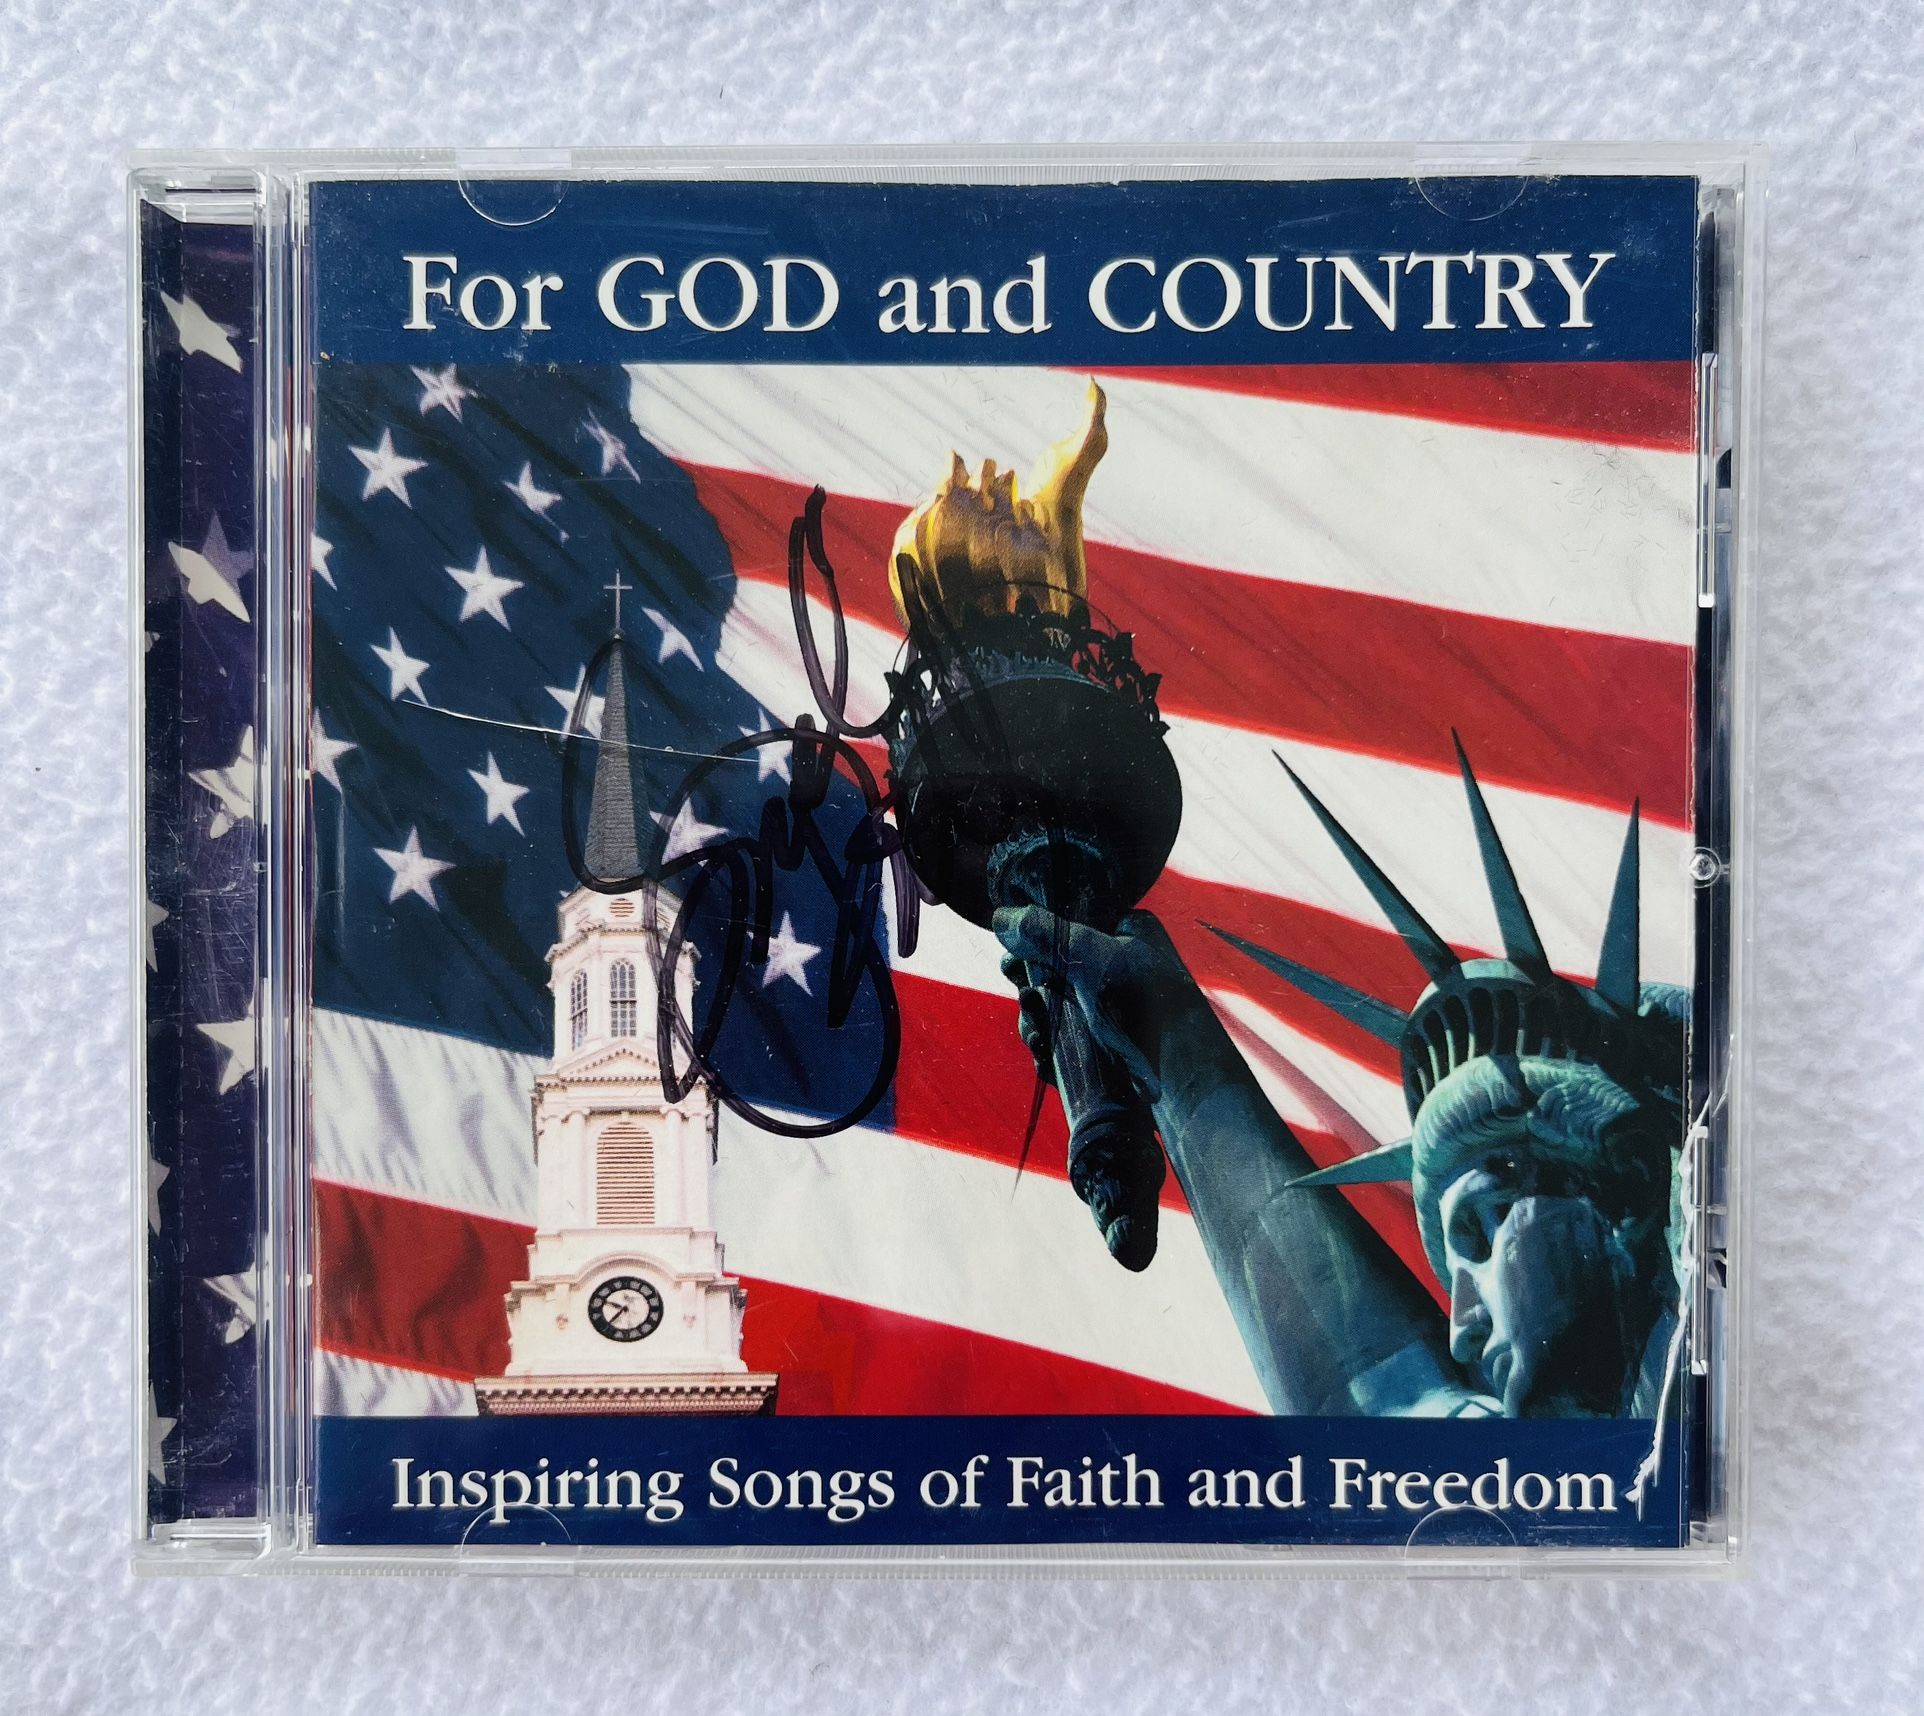 For God and Country by Various Artists (CD, Nov-2001, Word Distribution)